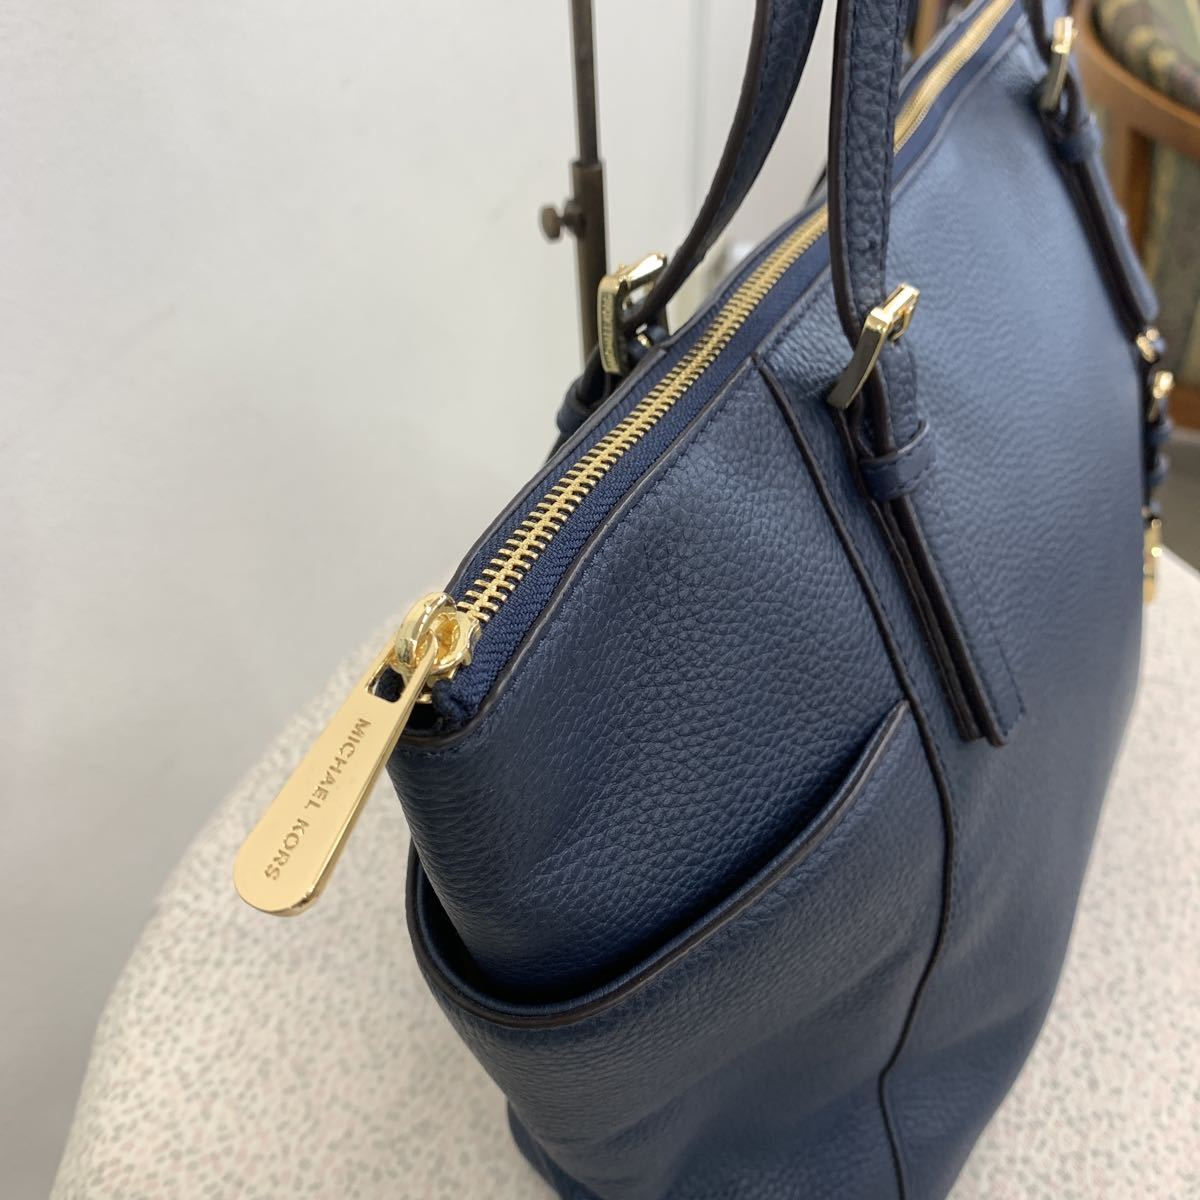  Michael Kors [MICHAEL KORS] on goods settled navy * fine quality cow leather material * shoulder tote bag * beautiful goods 